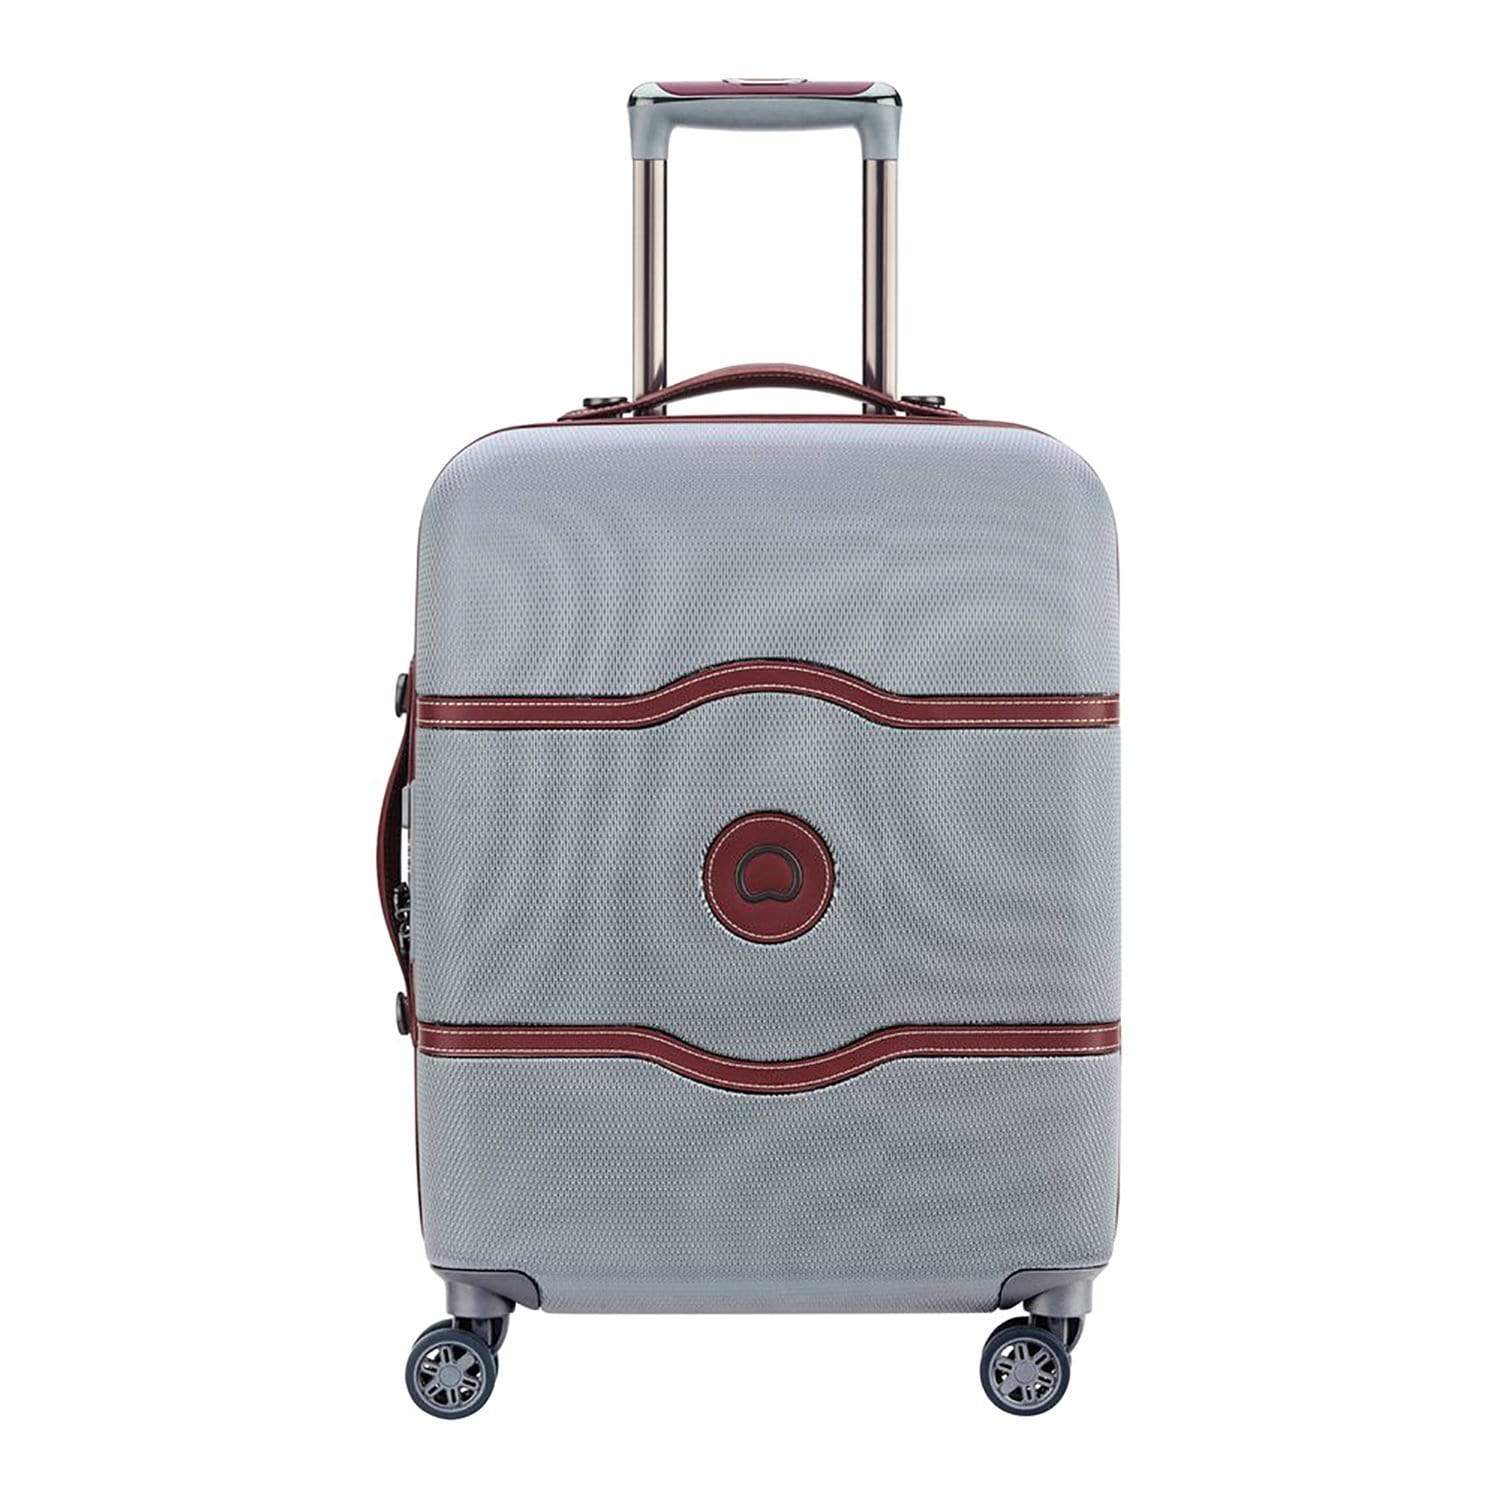 Delsey Chatelet Air 4 Double Wheel Cabin Trolley Case - Silver - 00167280511 SILVER - Jashanmal Home